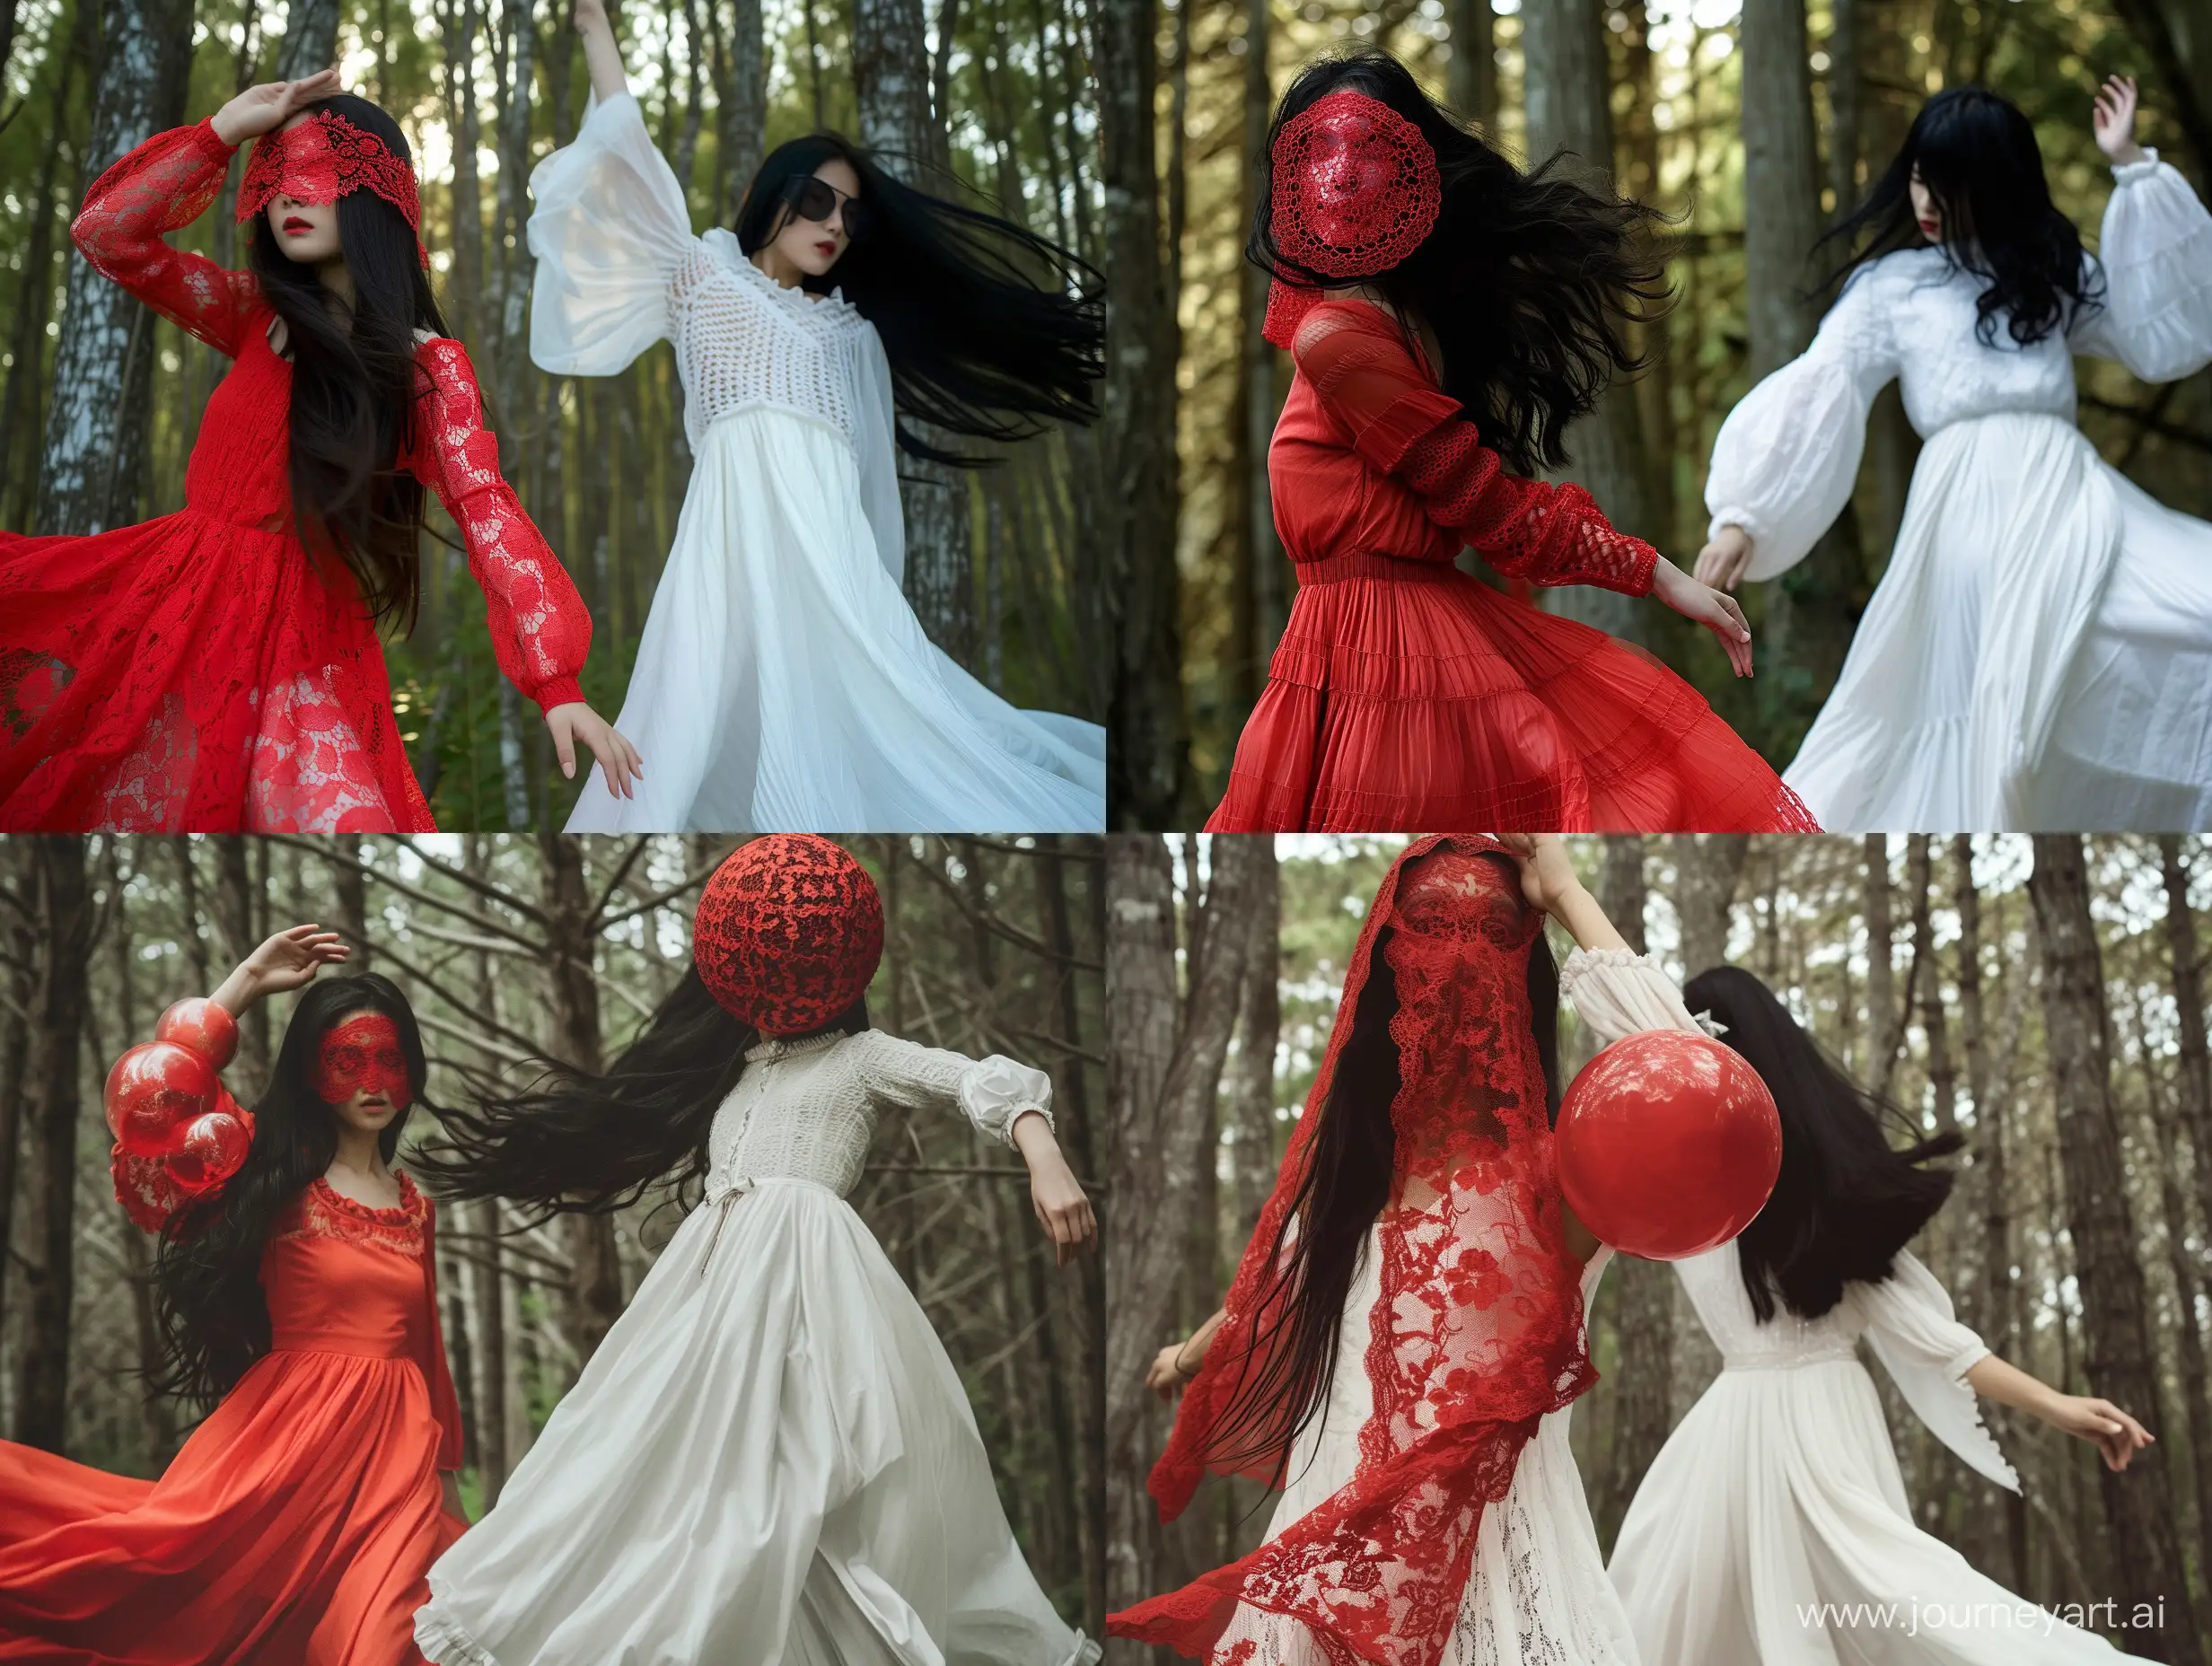 Enchanting-Forest-Dance-Graceful-Girls-in-Red-and-White-Skirts